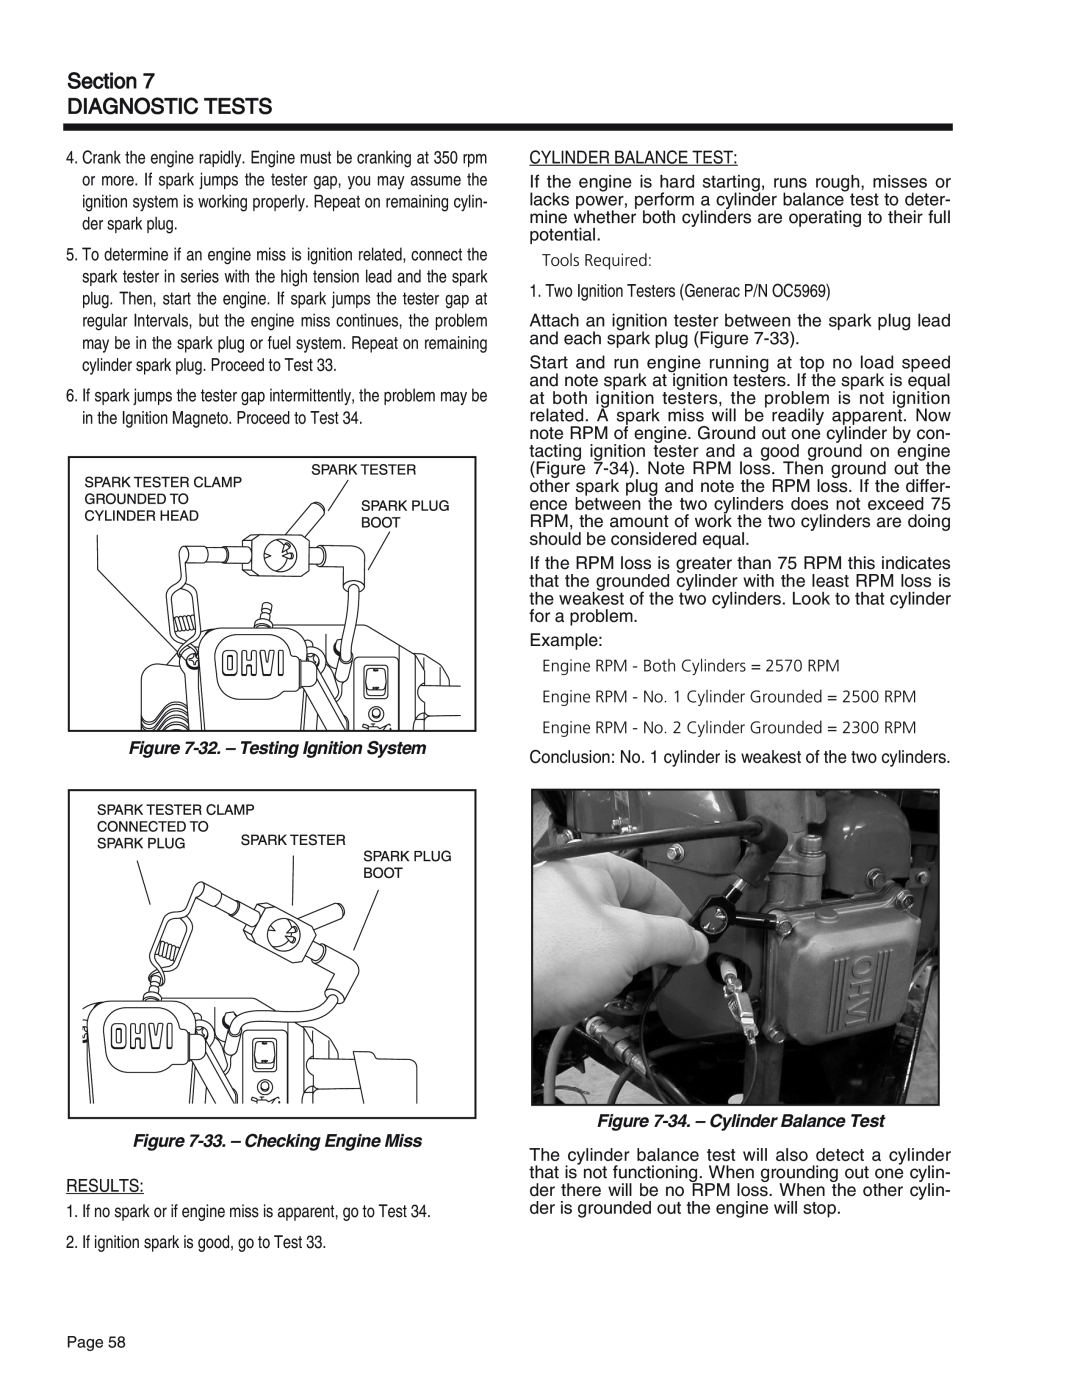 Generac Power Systems 55, 75, 65 manual 32.– Testing Ignition System, 33.– Checking Engine Miss, 34.– Cylinder Balance Test 